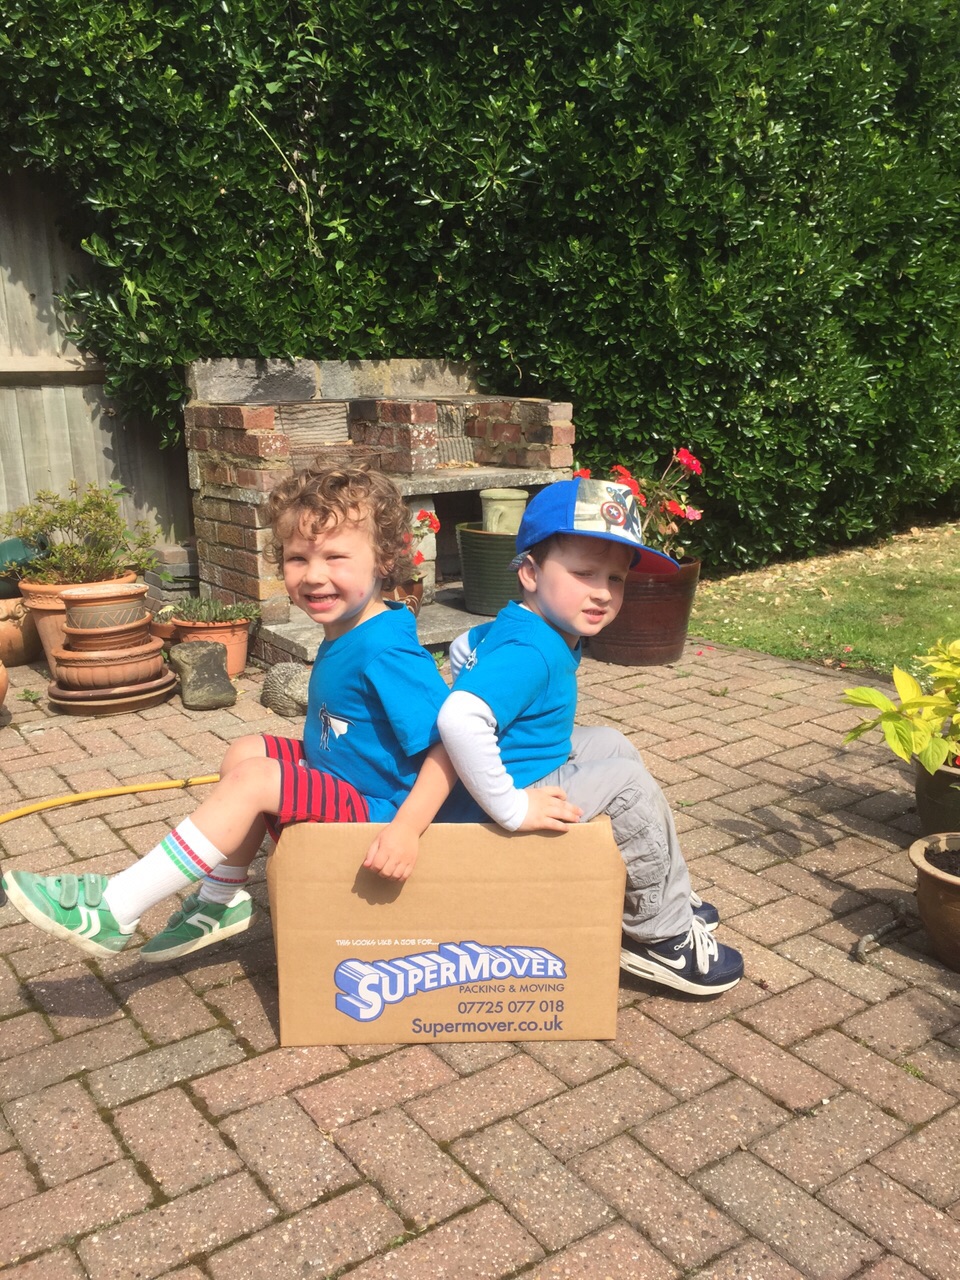 The Mini Movers testing the strength of our boxes! ?